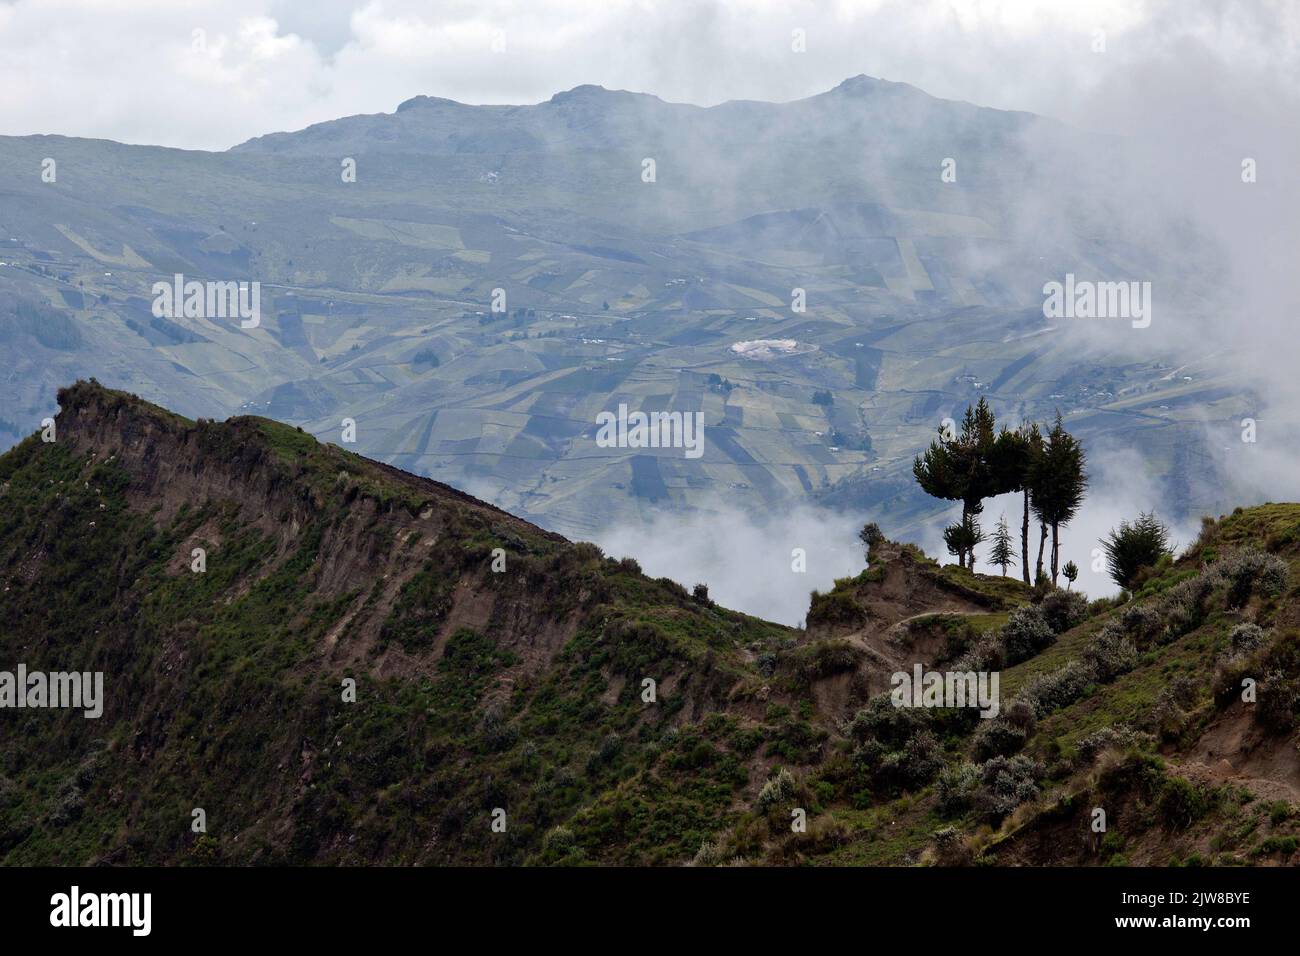 A beautiful view of a forest against a background of the snowy mountain of Cotopaxi in Ecuador Stock Photo